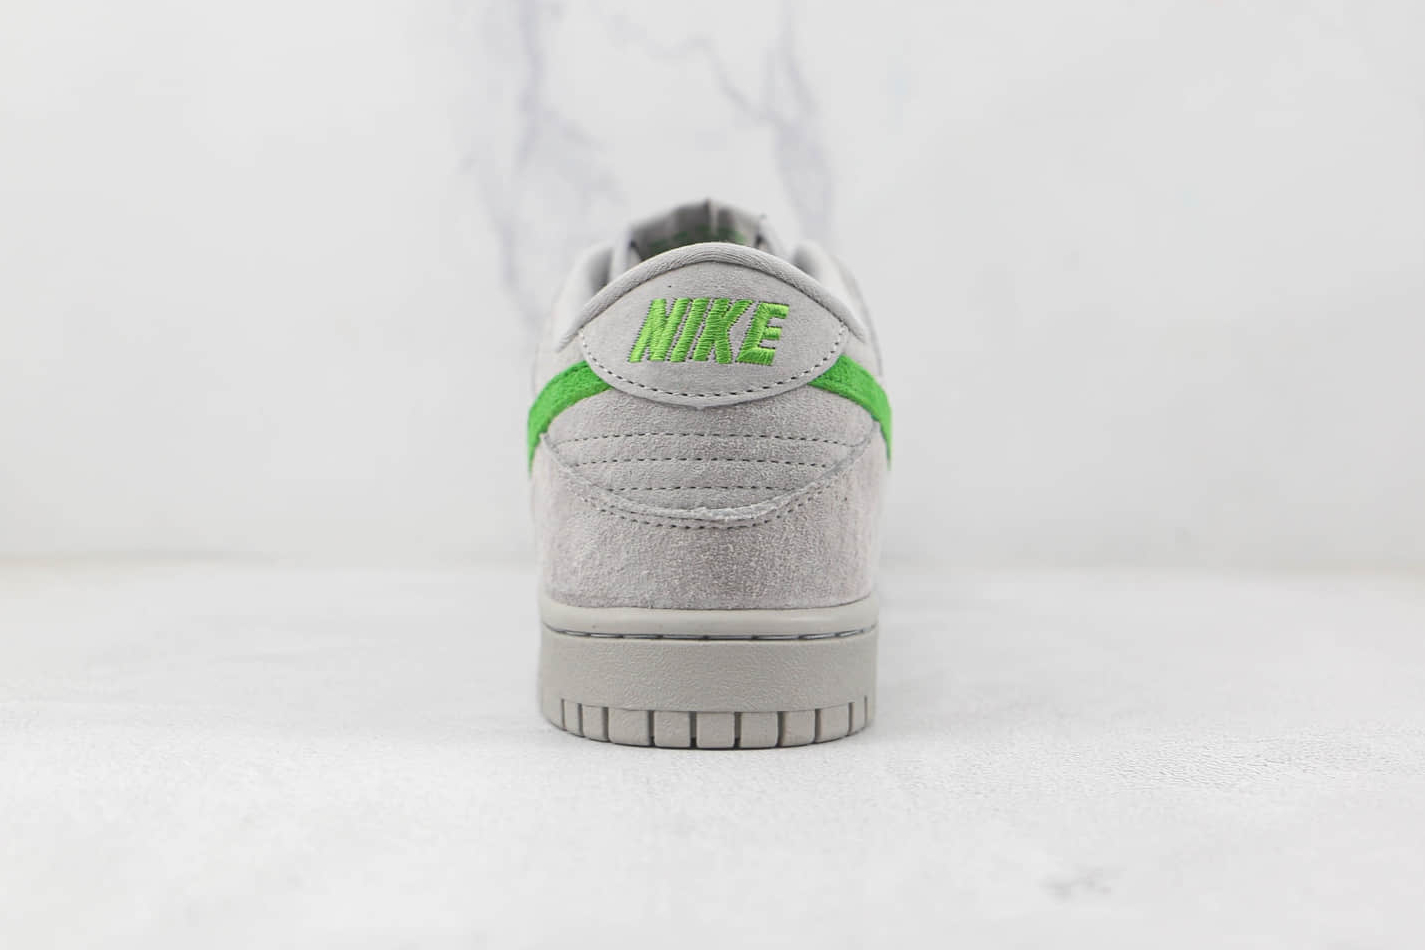 Nike SB Dunk Low Dark Grey Wolf Grey Green Shoes 316272-526 - Stylish and Durable Footwear for Skateboarding and Streetwear